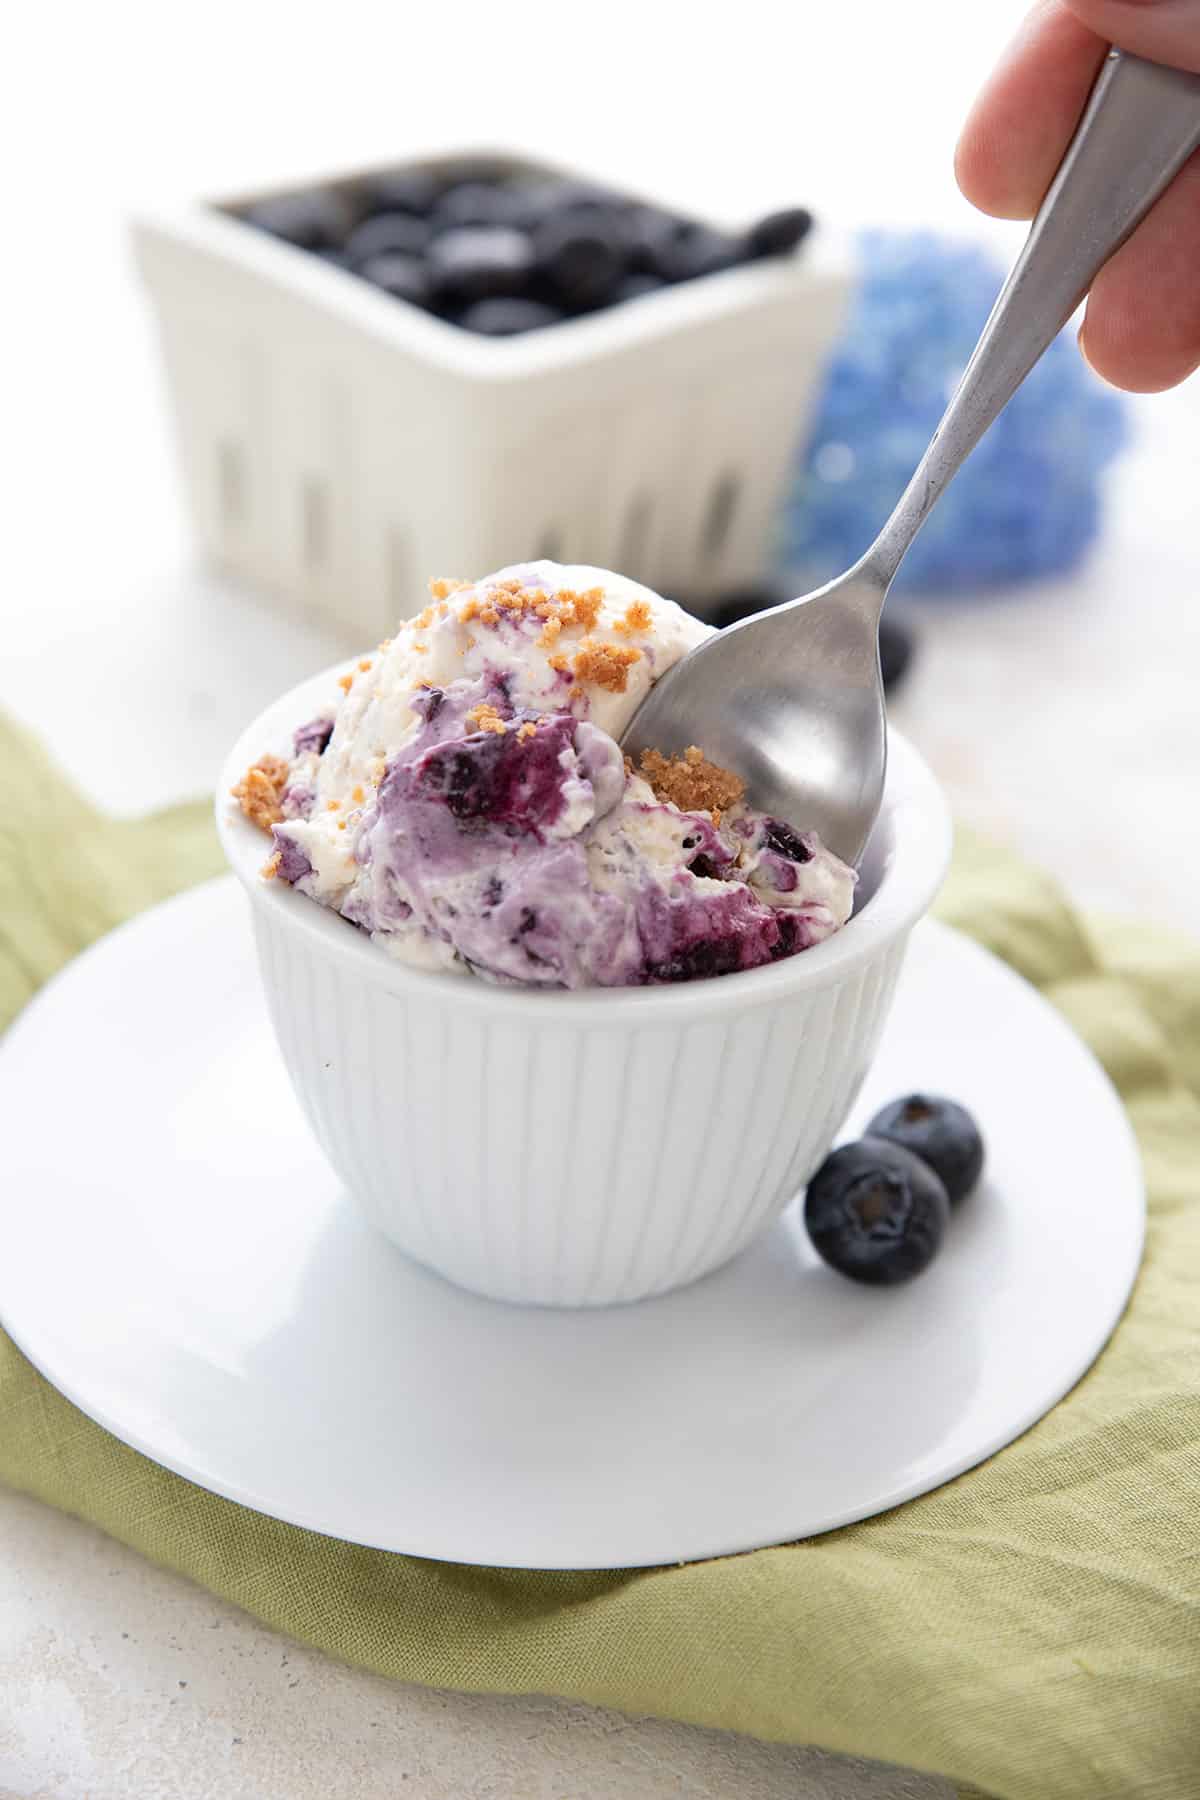 A spoon digging into some keto blueberry ice cream in a white dish.